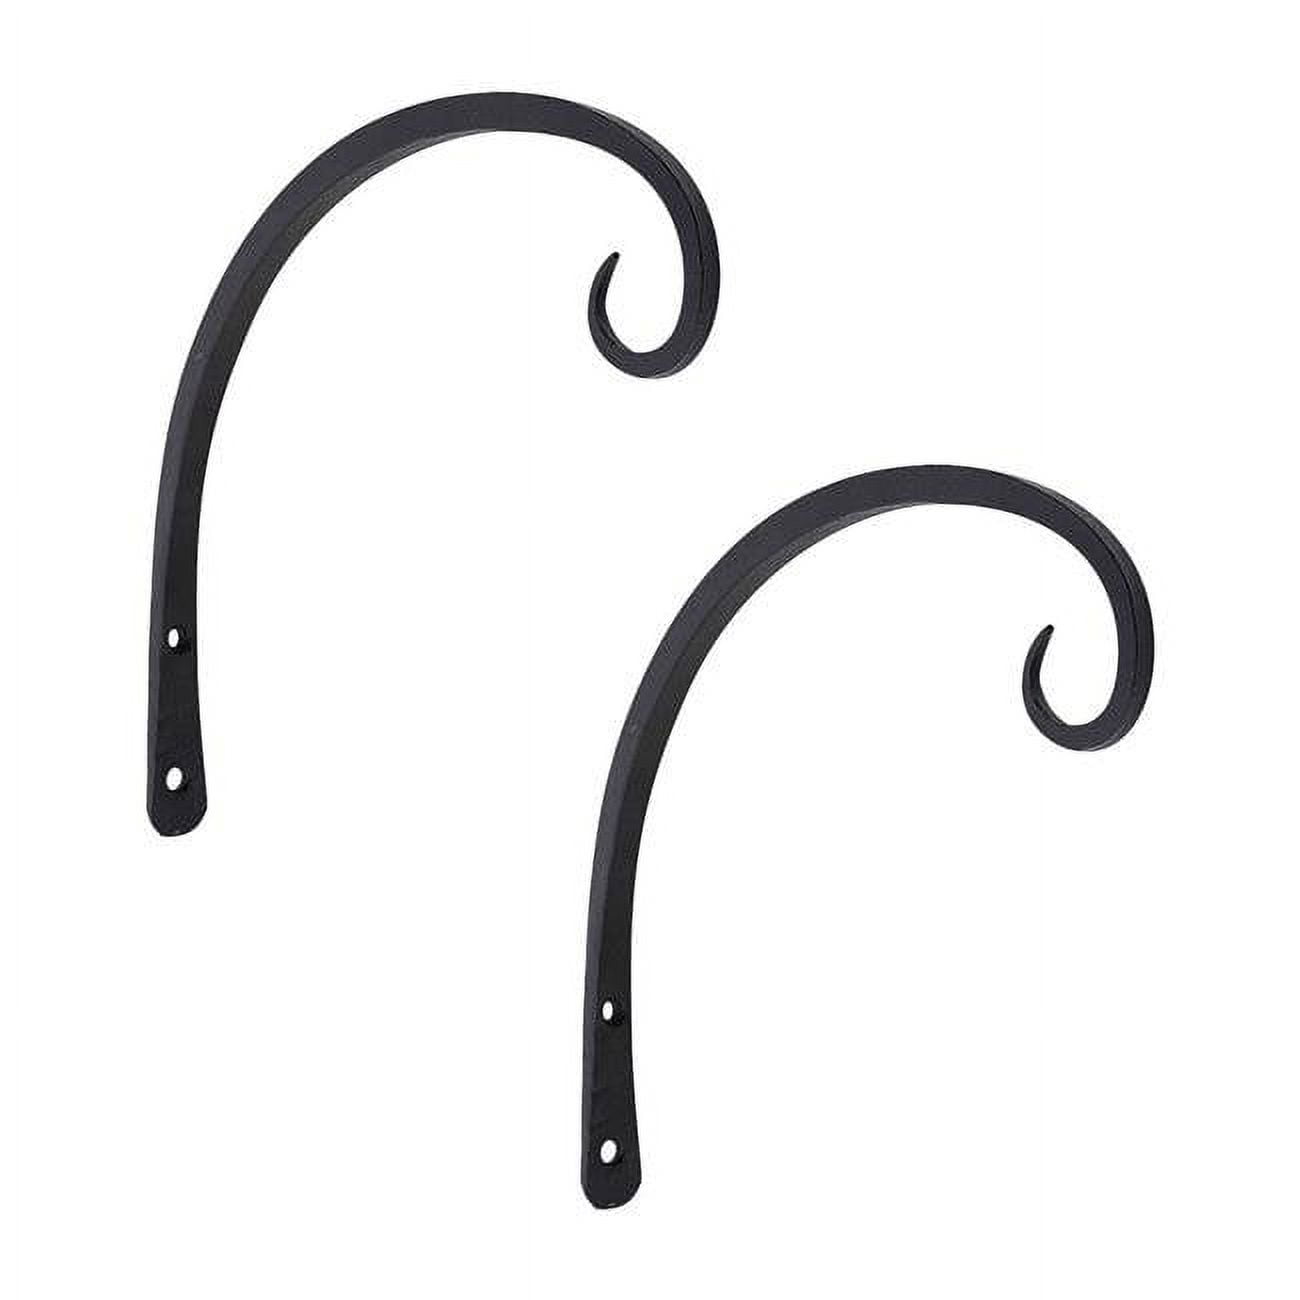 Picture of ACHLA Designs TSH-11-2 9 in. Downcurled Bracket, Black - Pack of 2